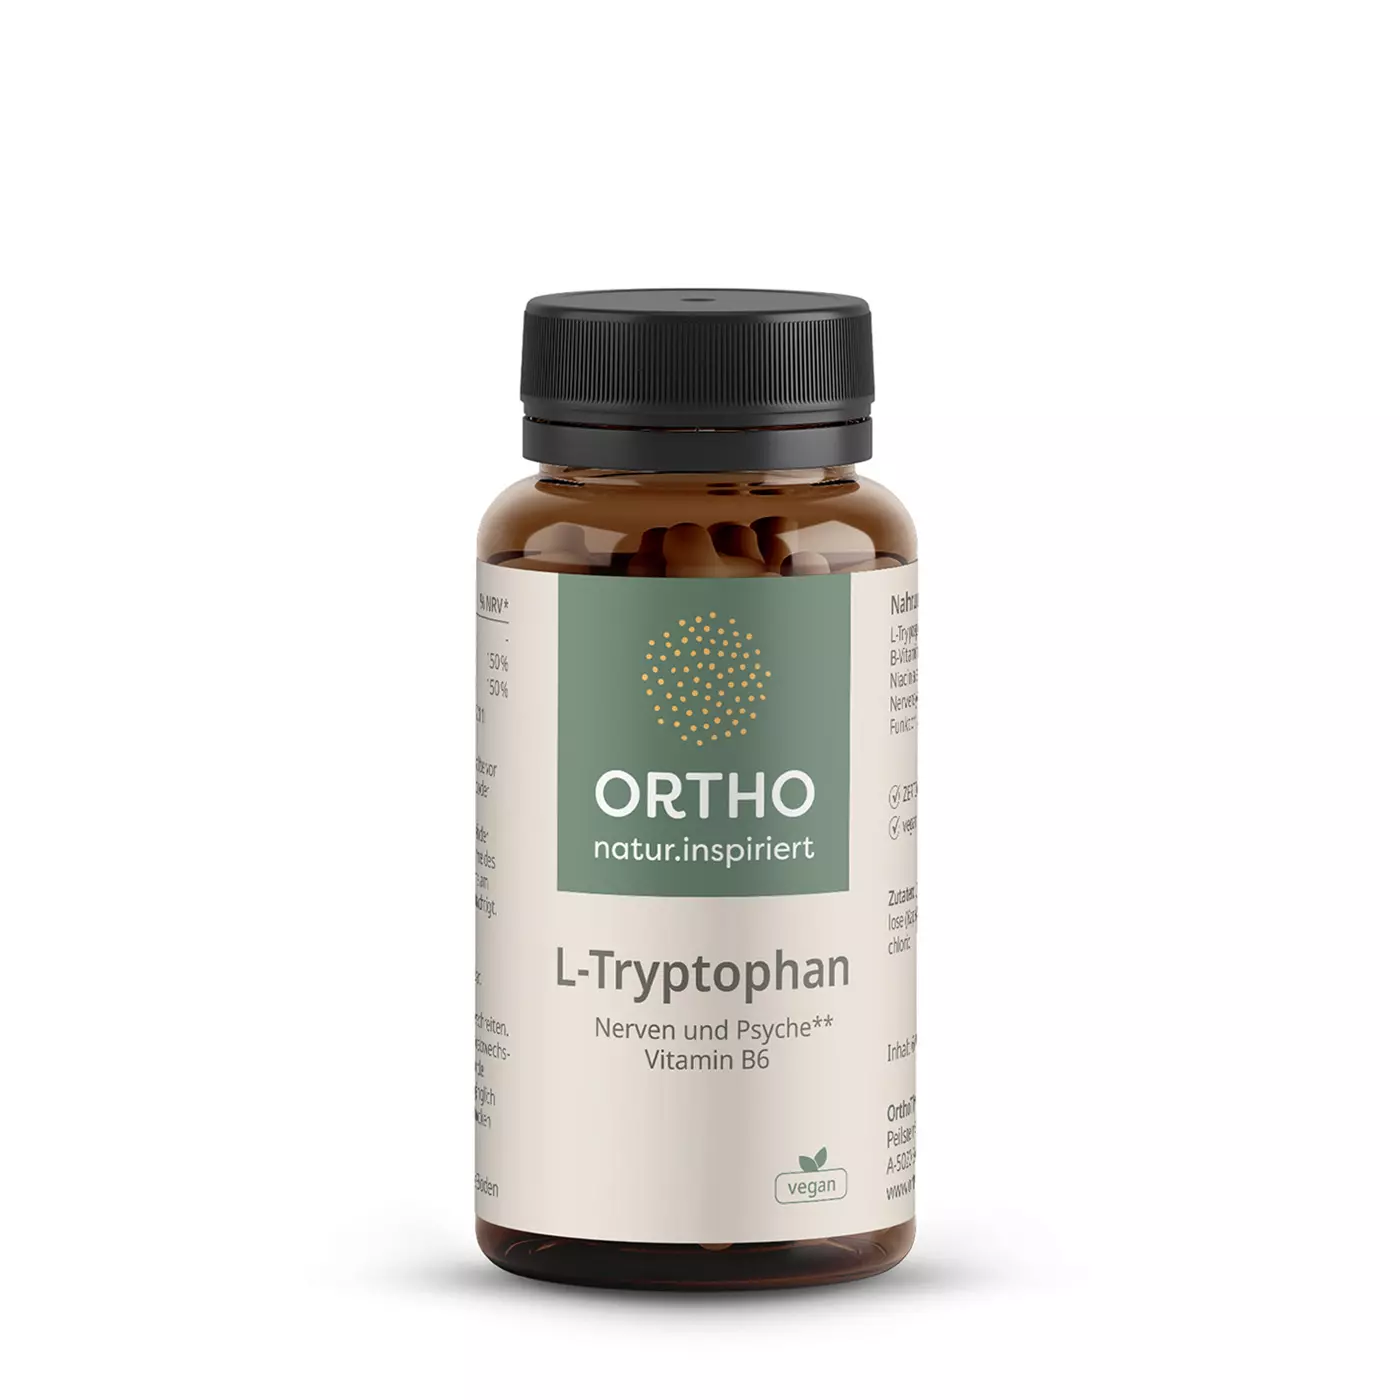 OrthoTherapia L-Tryptophan